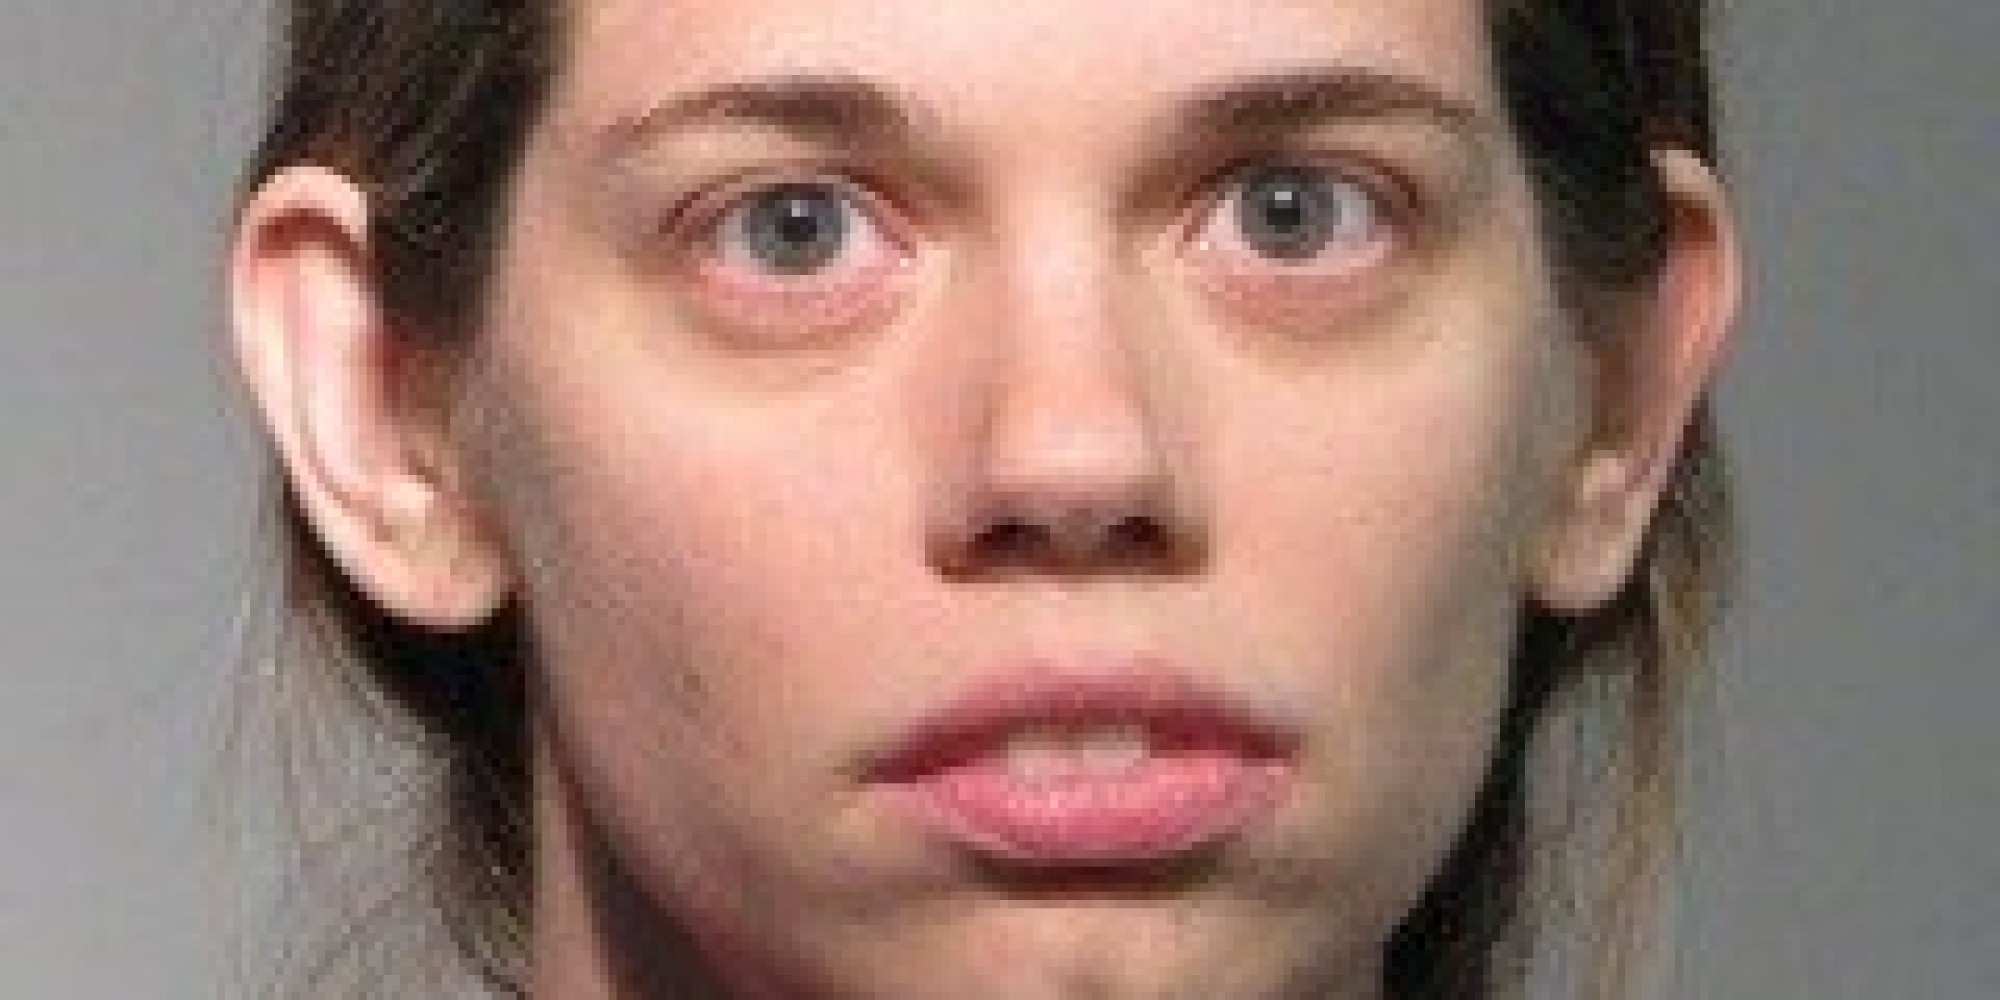 Sarah Adleta Sentenced To 54 Years For Making Child Porn With Husband ... pic